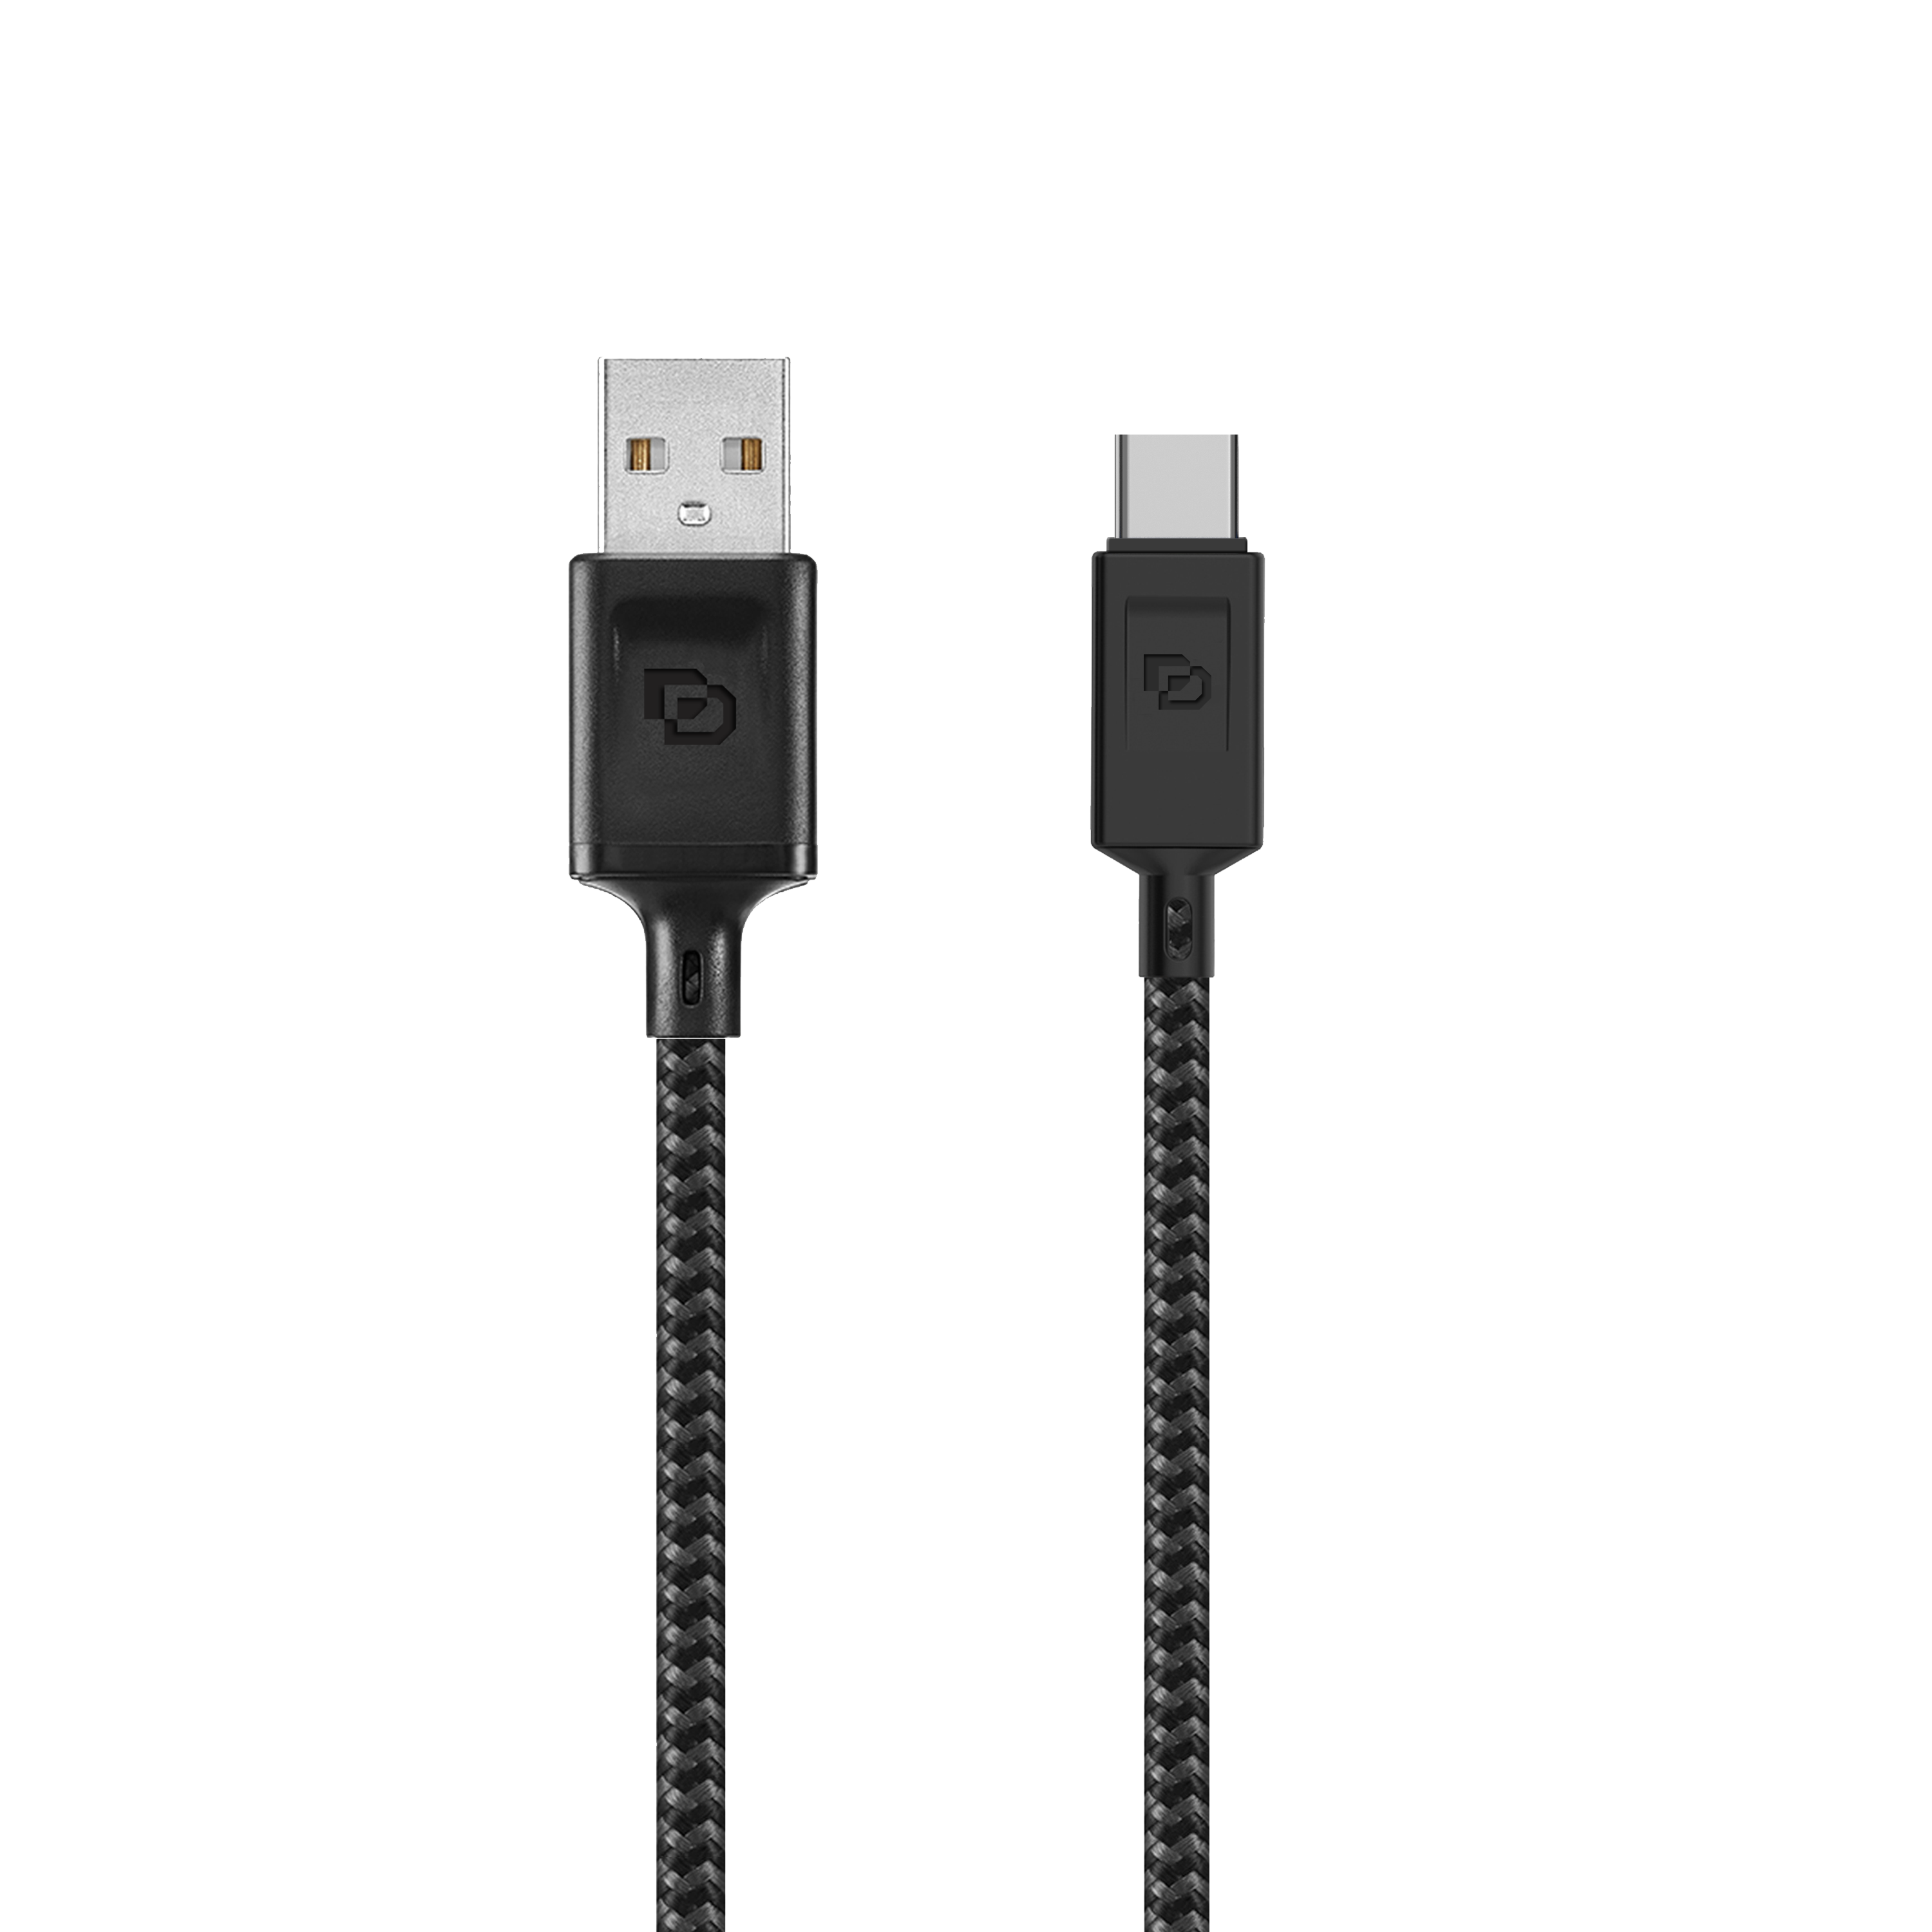  - Cable USB-A a USB-C, USB 2.0, 1.2 Mt Rugged Dusted negro 3